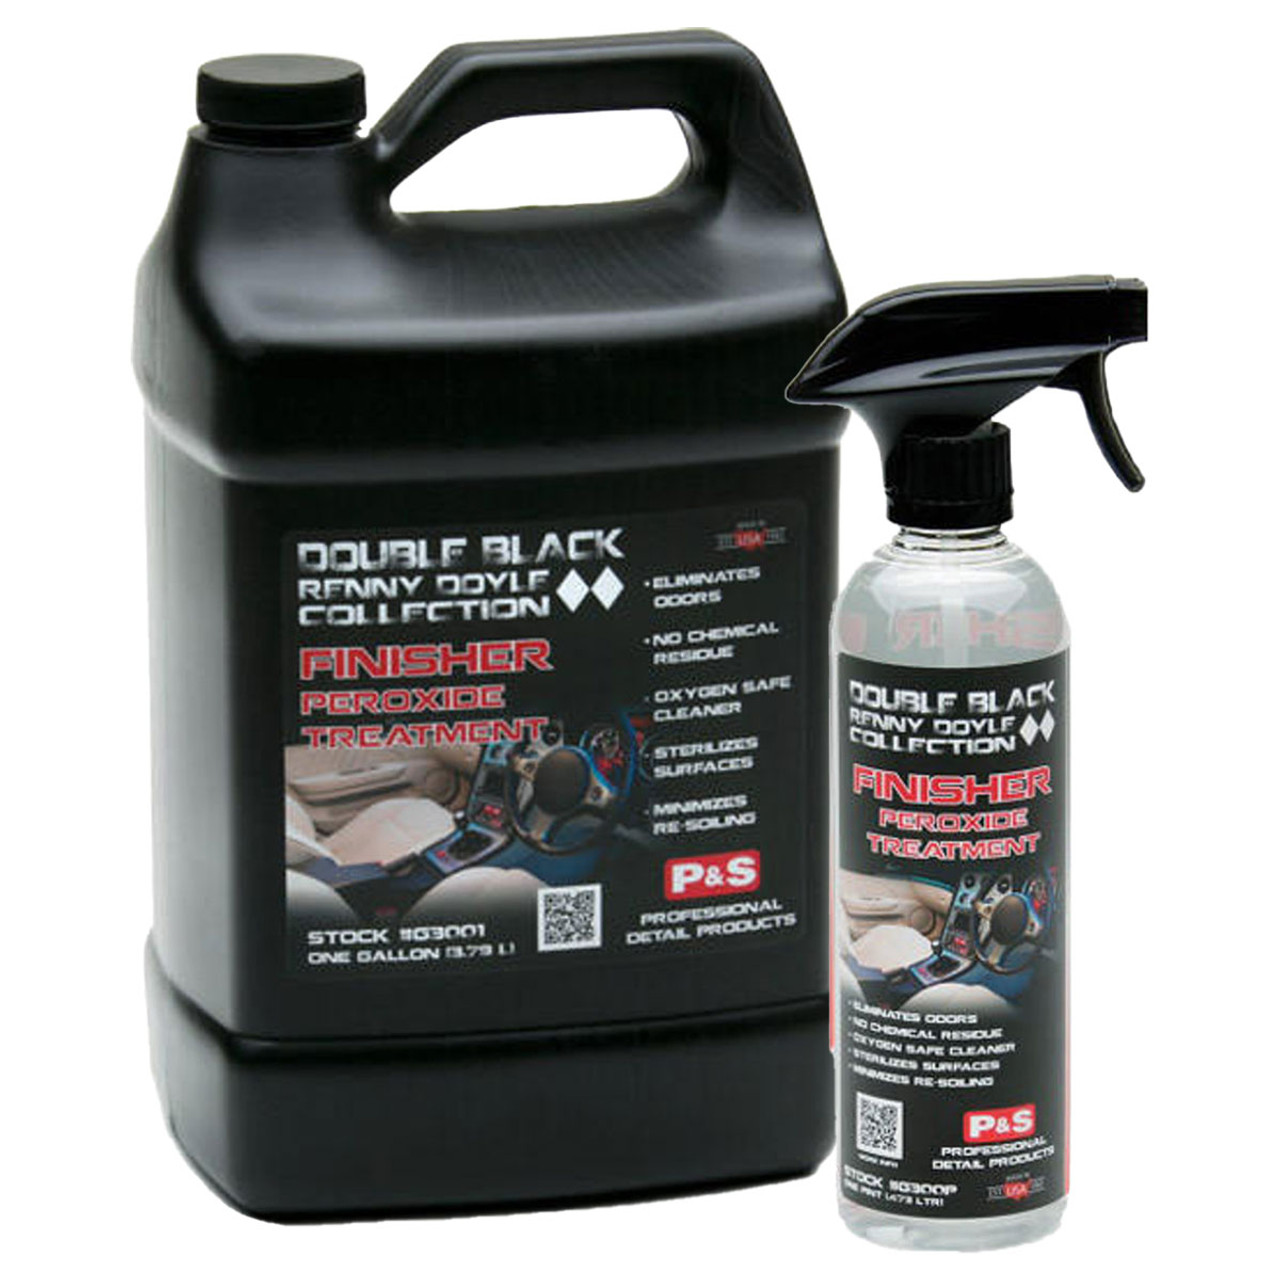 Chief's Choice Aluminum & Metal Cleaner Kit